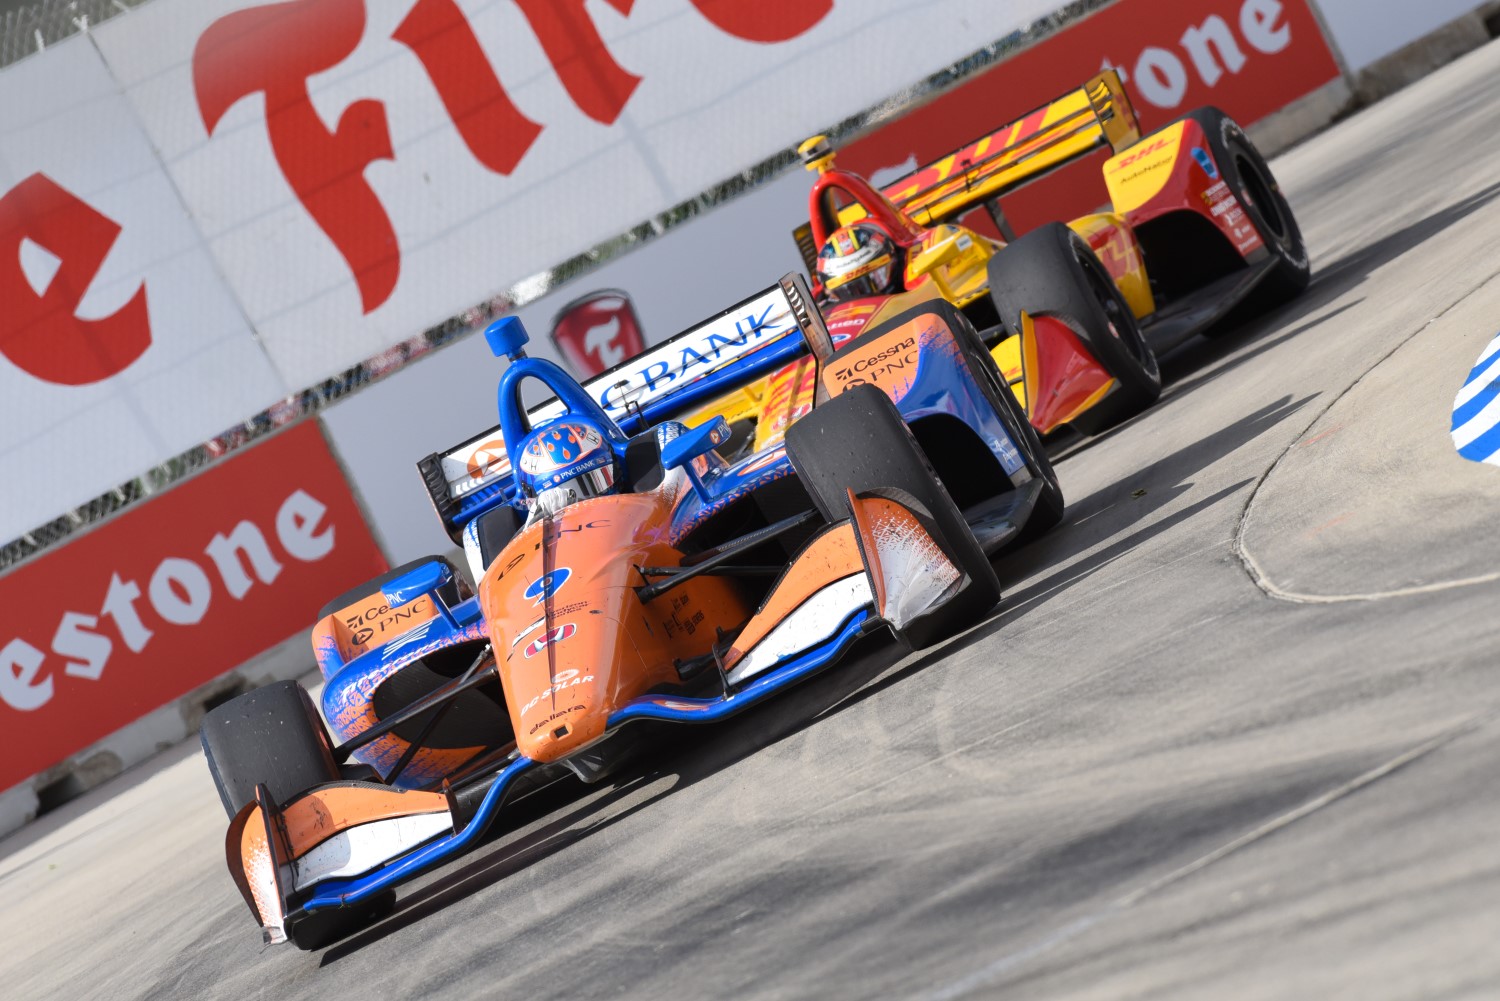 Dixon Edged out Hunter-Reay in Race 1